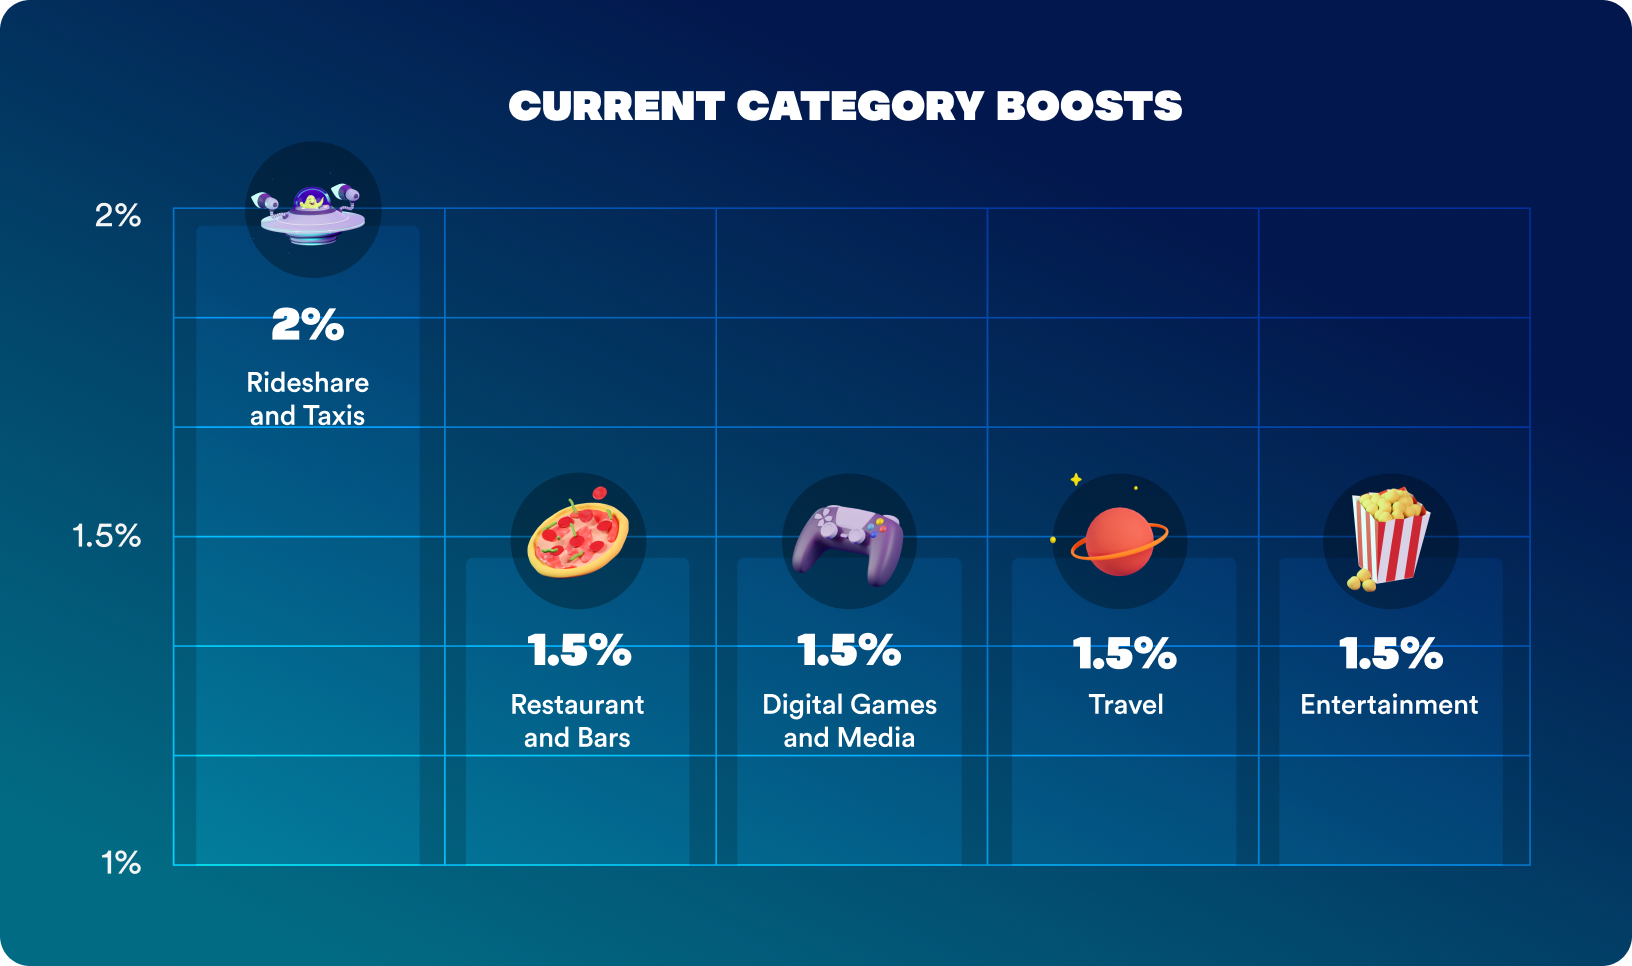 New Card Boost Added: Category Boosts